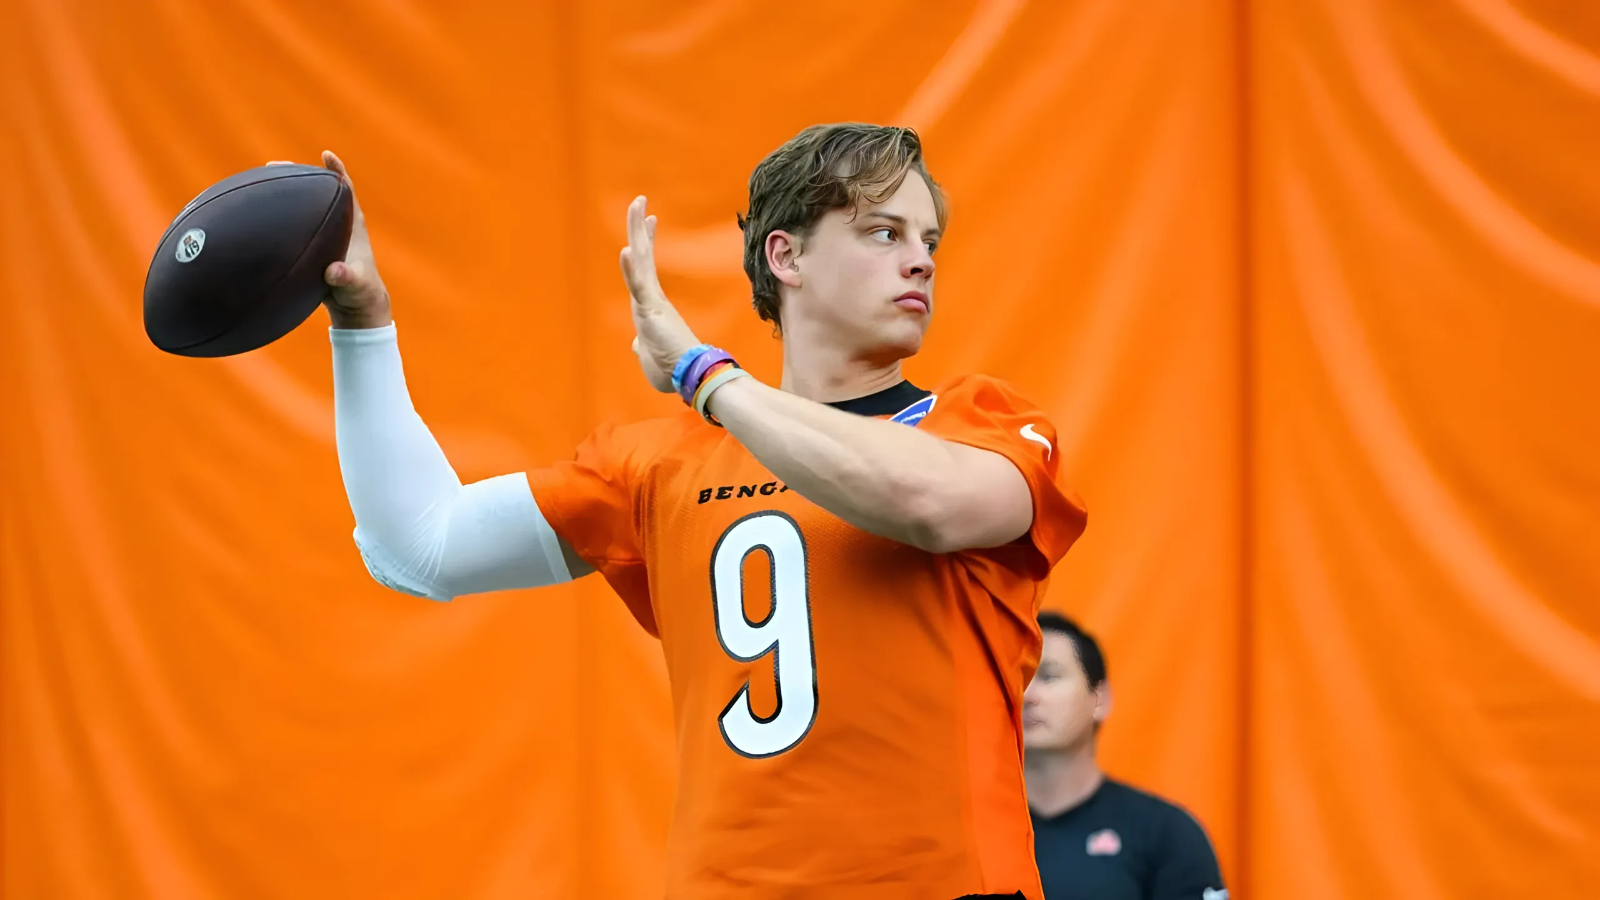 On Day 1, Bengals' Joe Burrow Is A-1: 'Whatever He Did In The Offseason Worked'